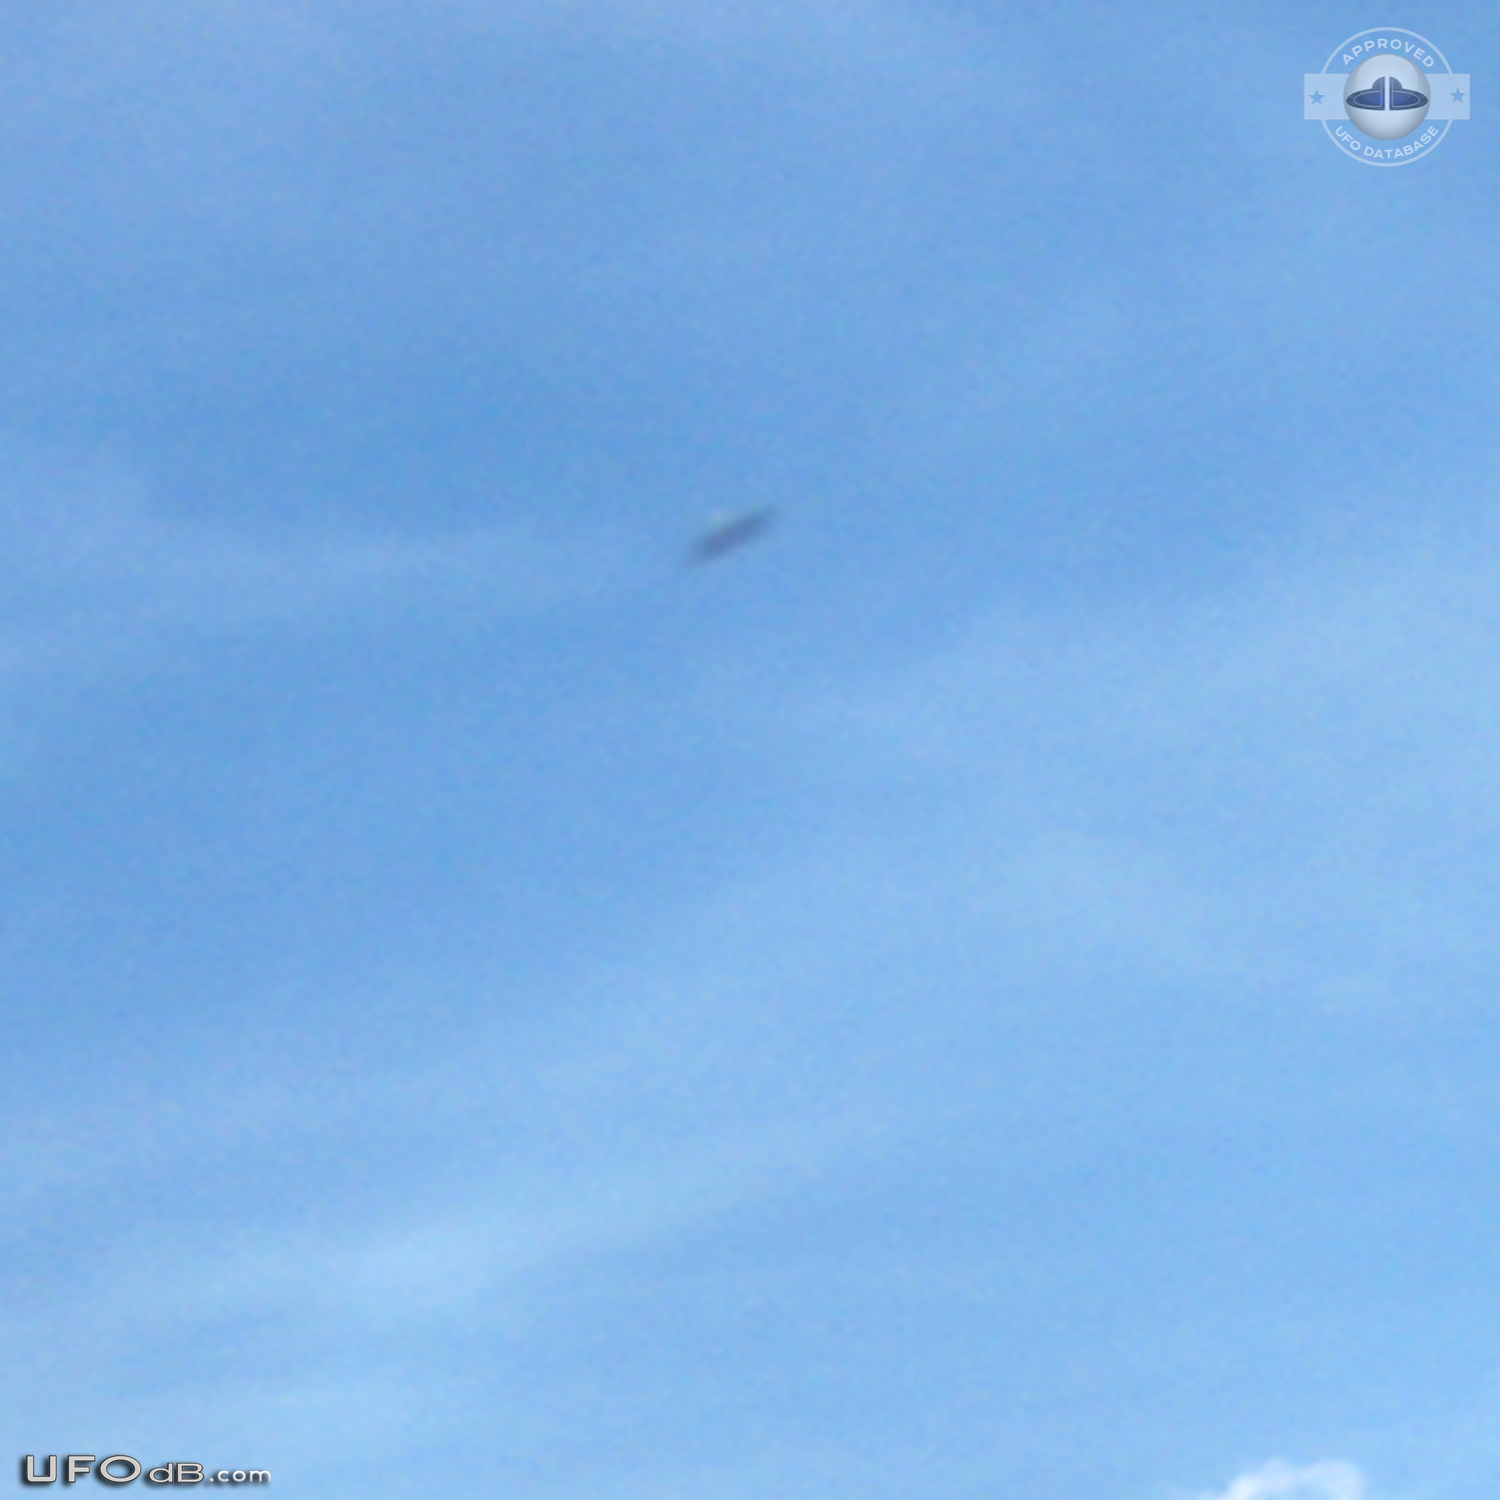 Picture of Graffiti on wall captures UFO in the sky in Cumbaya Ecuador UFO Picture #552-4